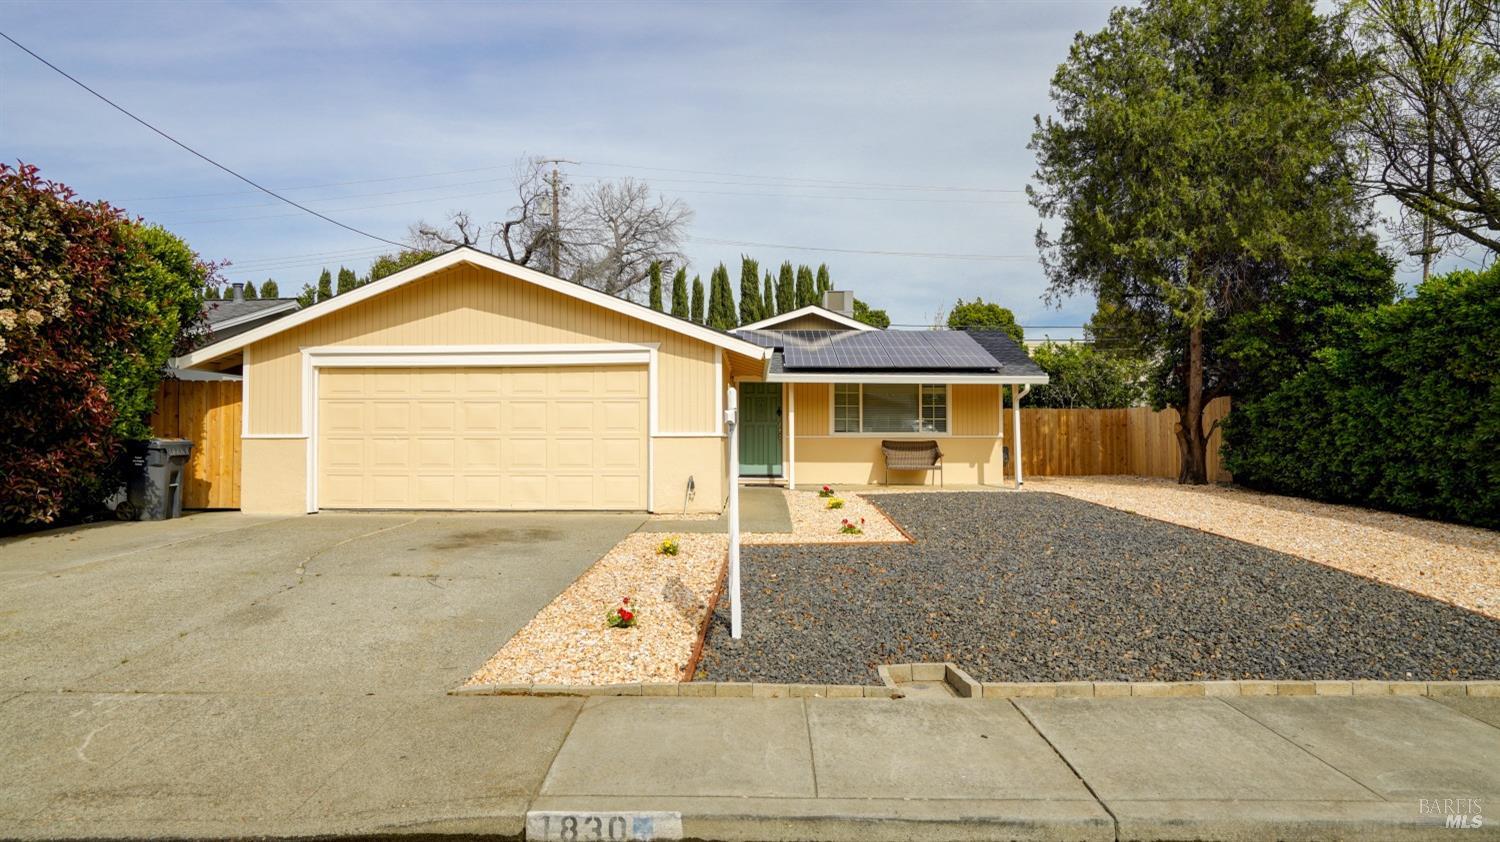 Photo of 1830 Clay St in Fairfield, CA